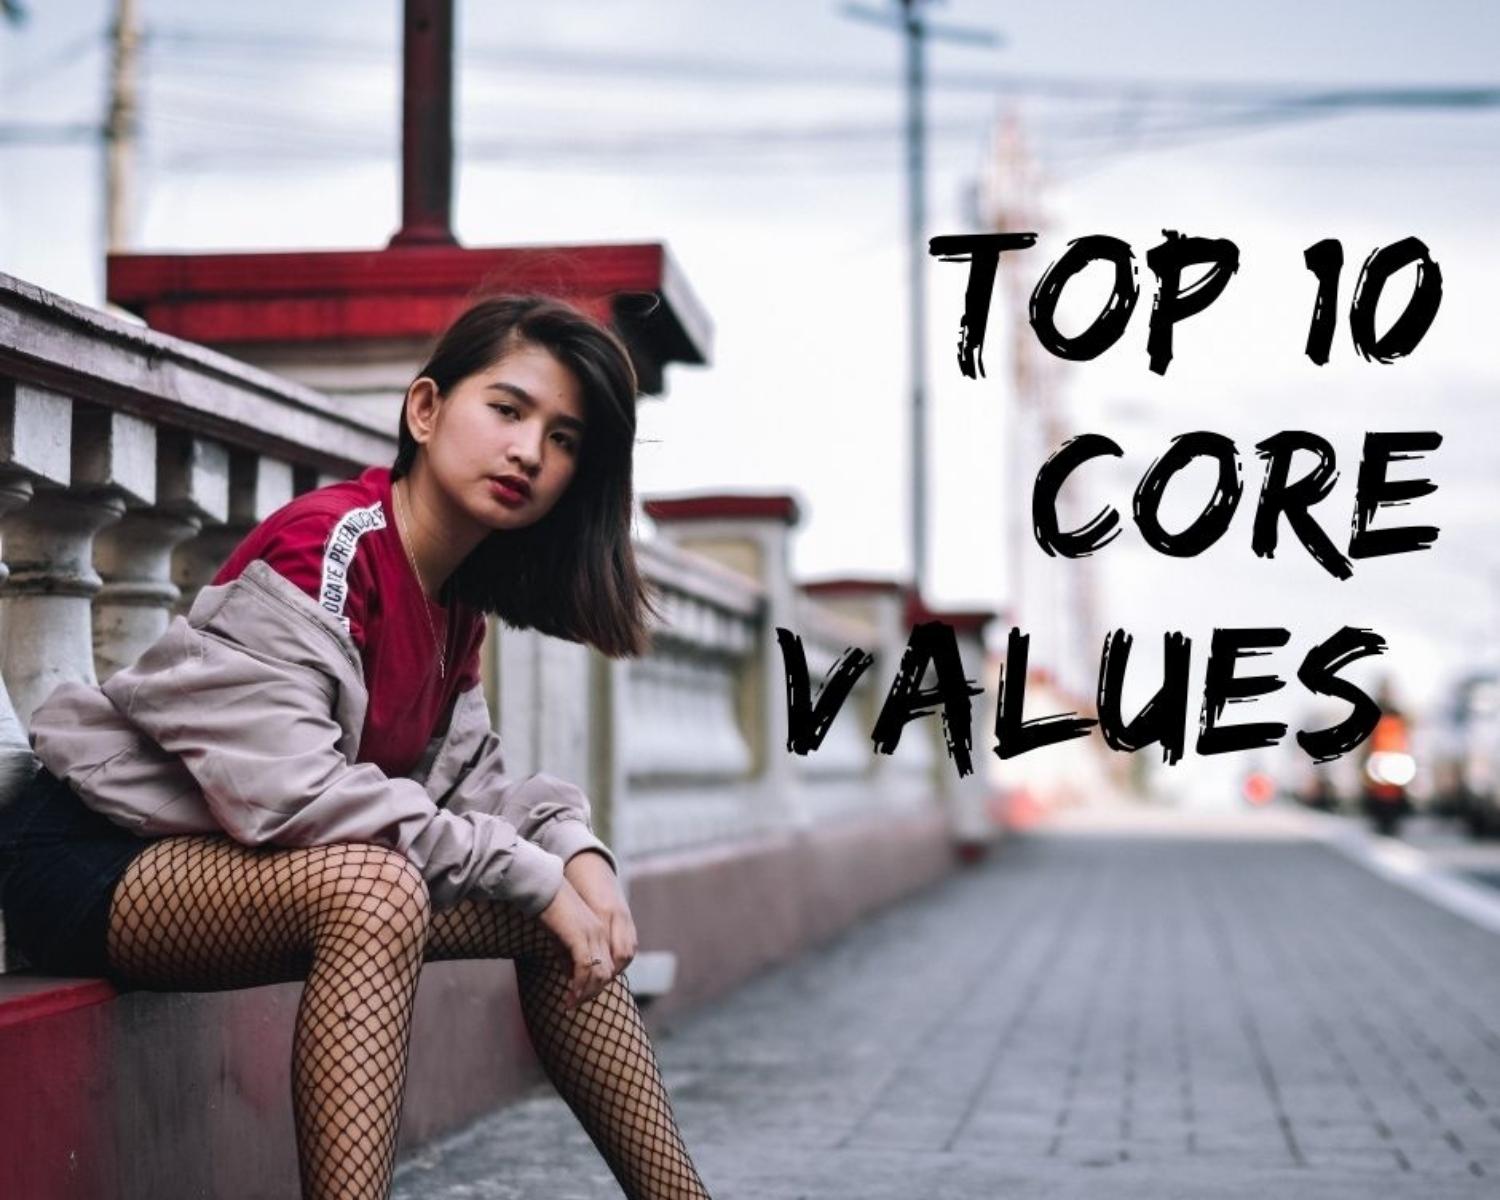 Top 10 core values for living Great life  